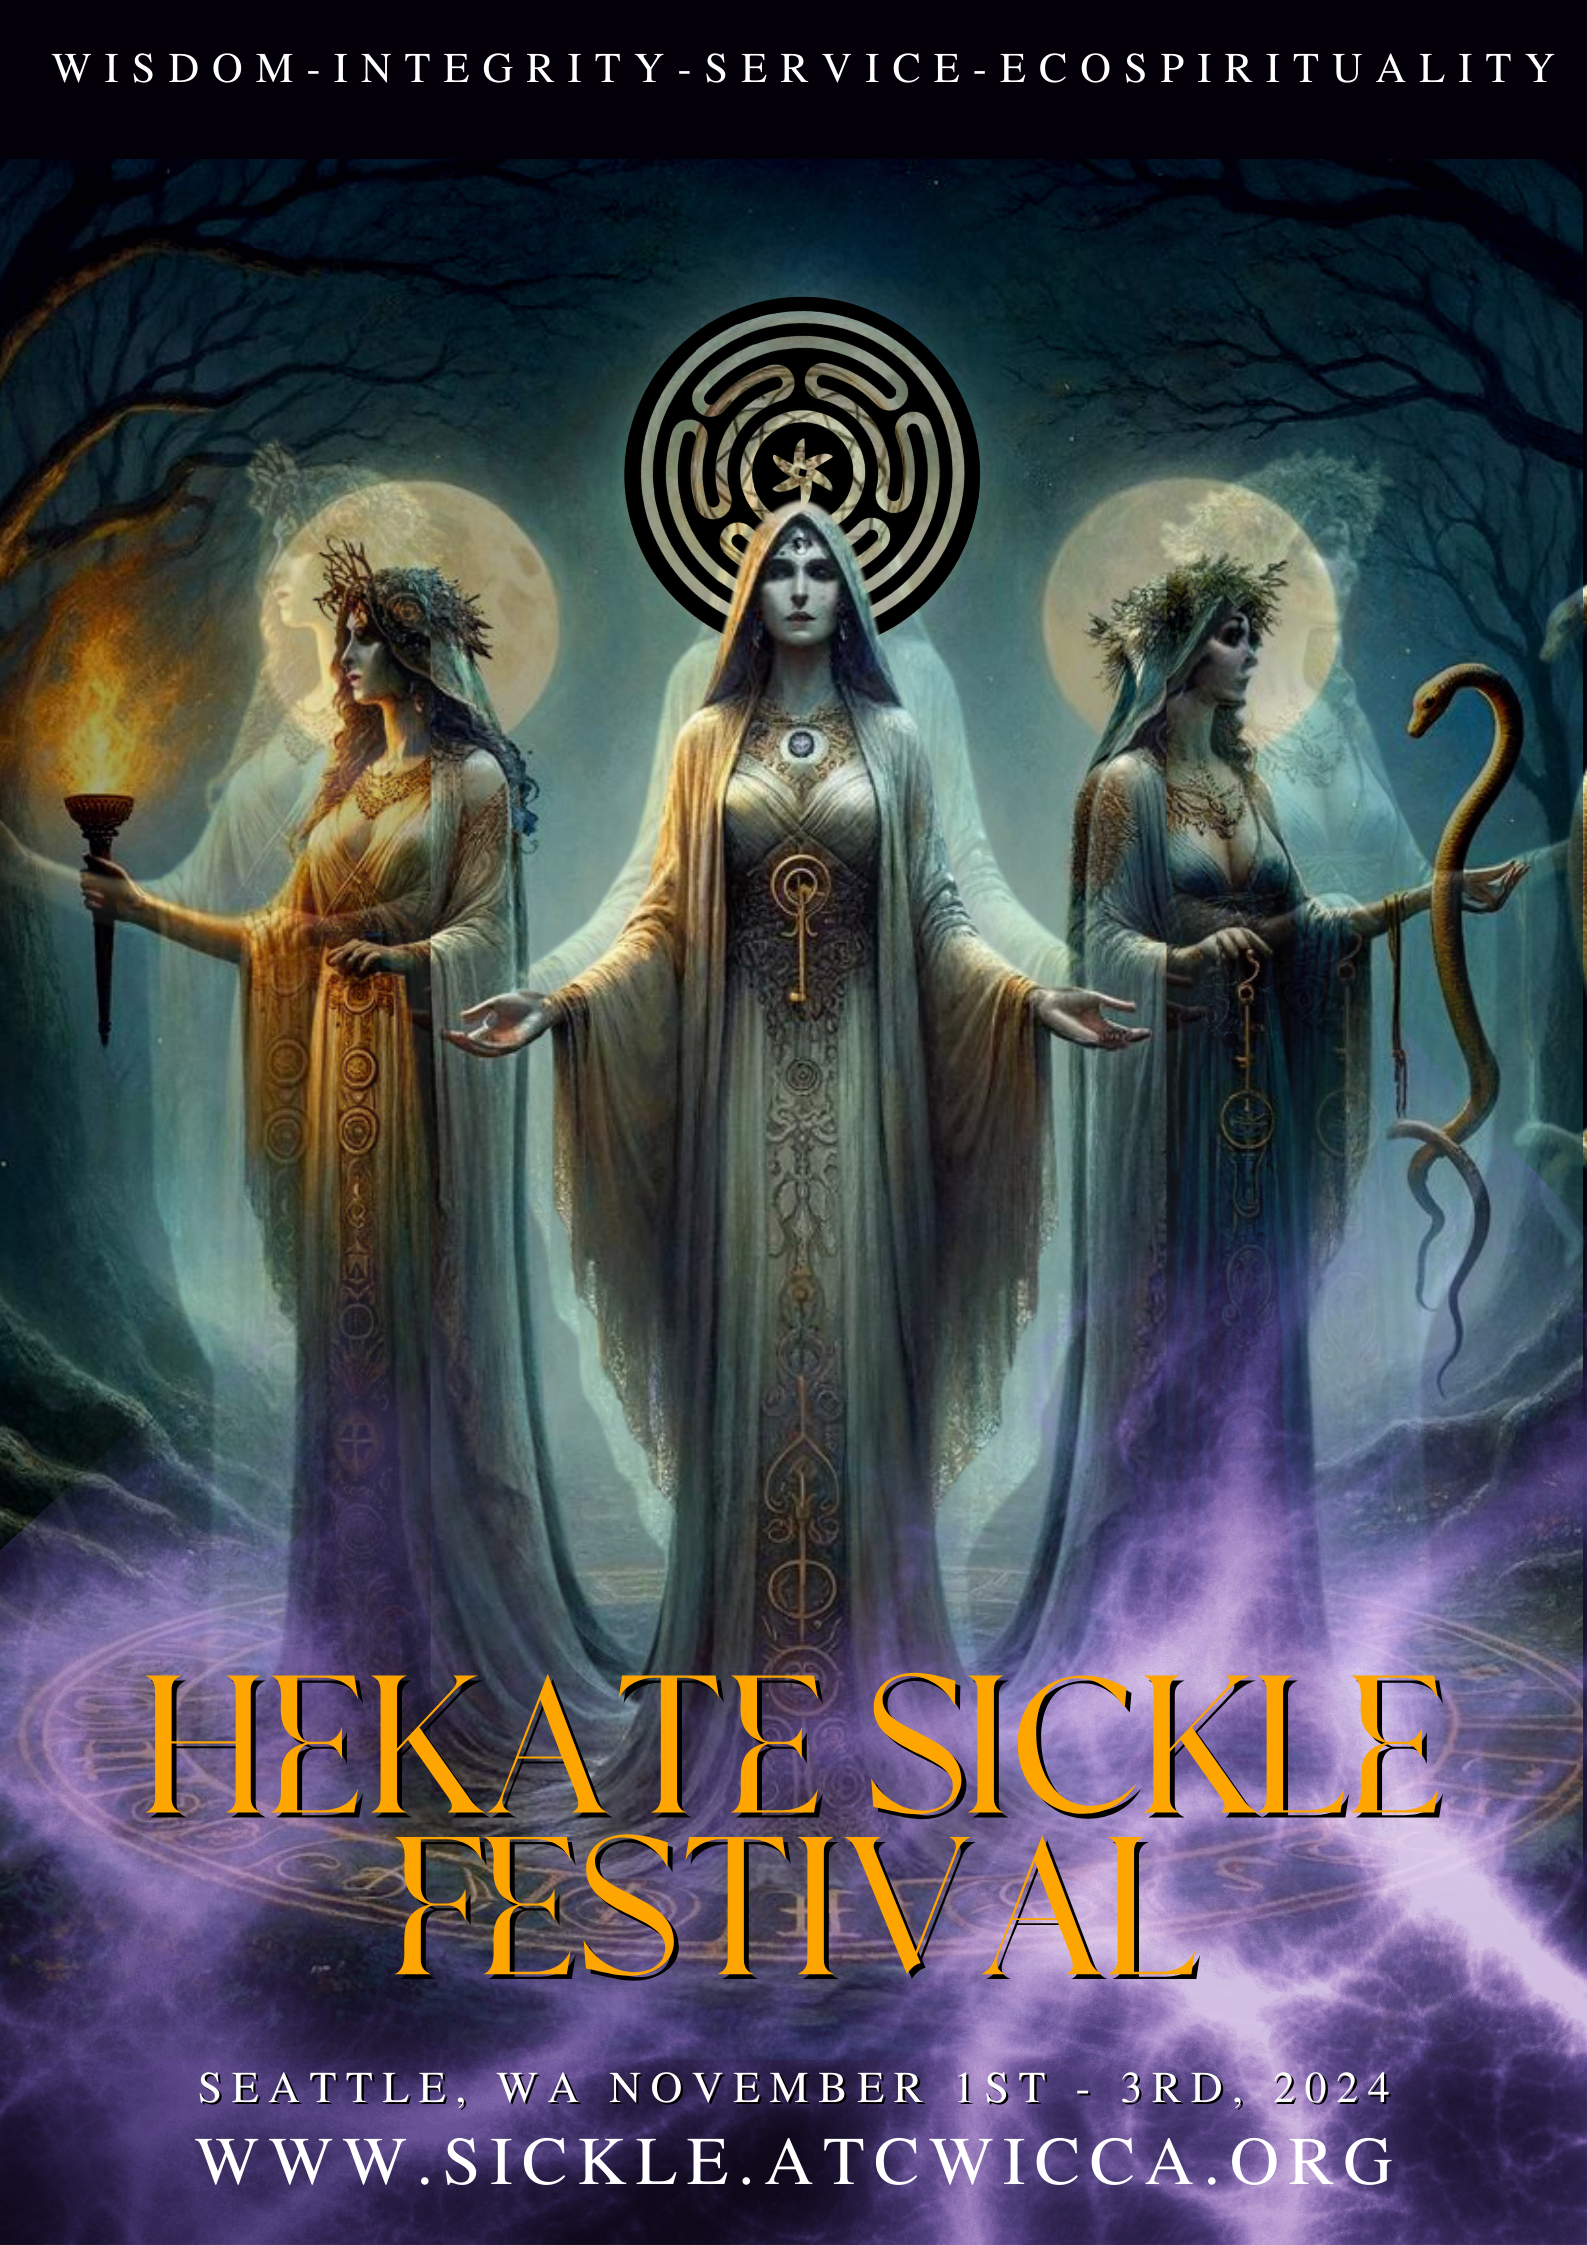 A poster for hekate 's sickle festival xxxiii the power of the witch